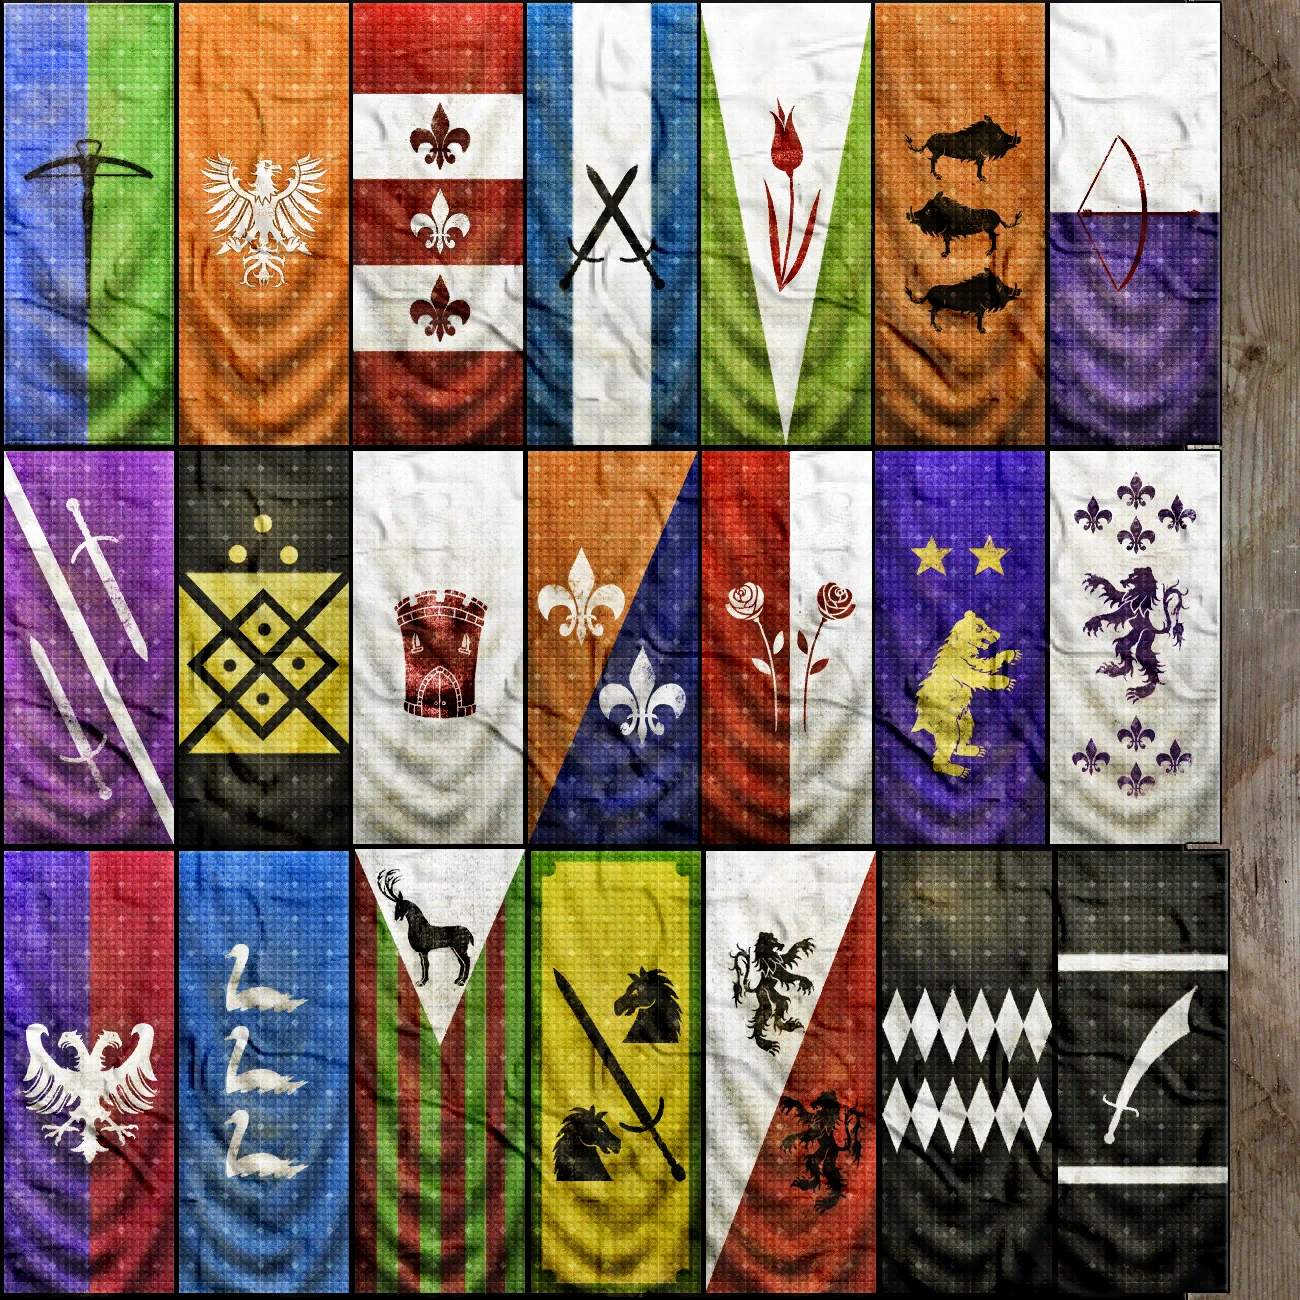 mount and blade warband new banners